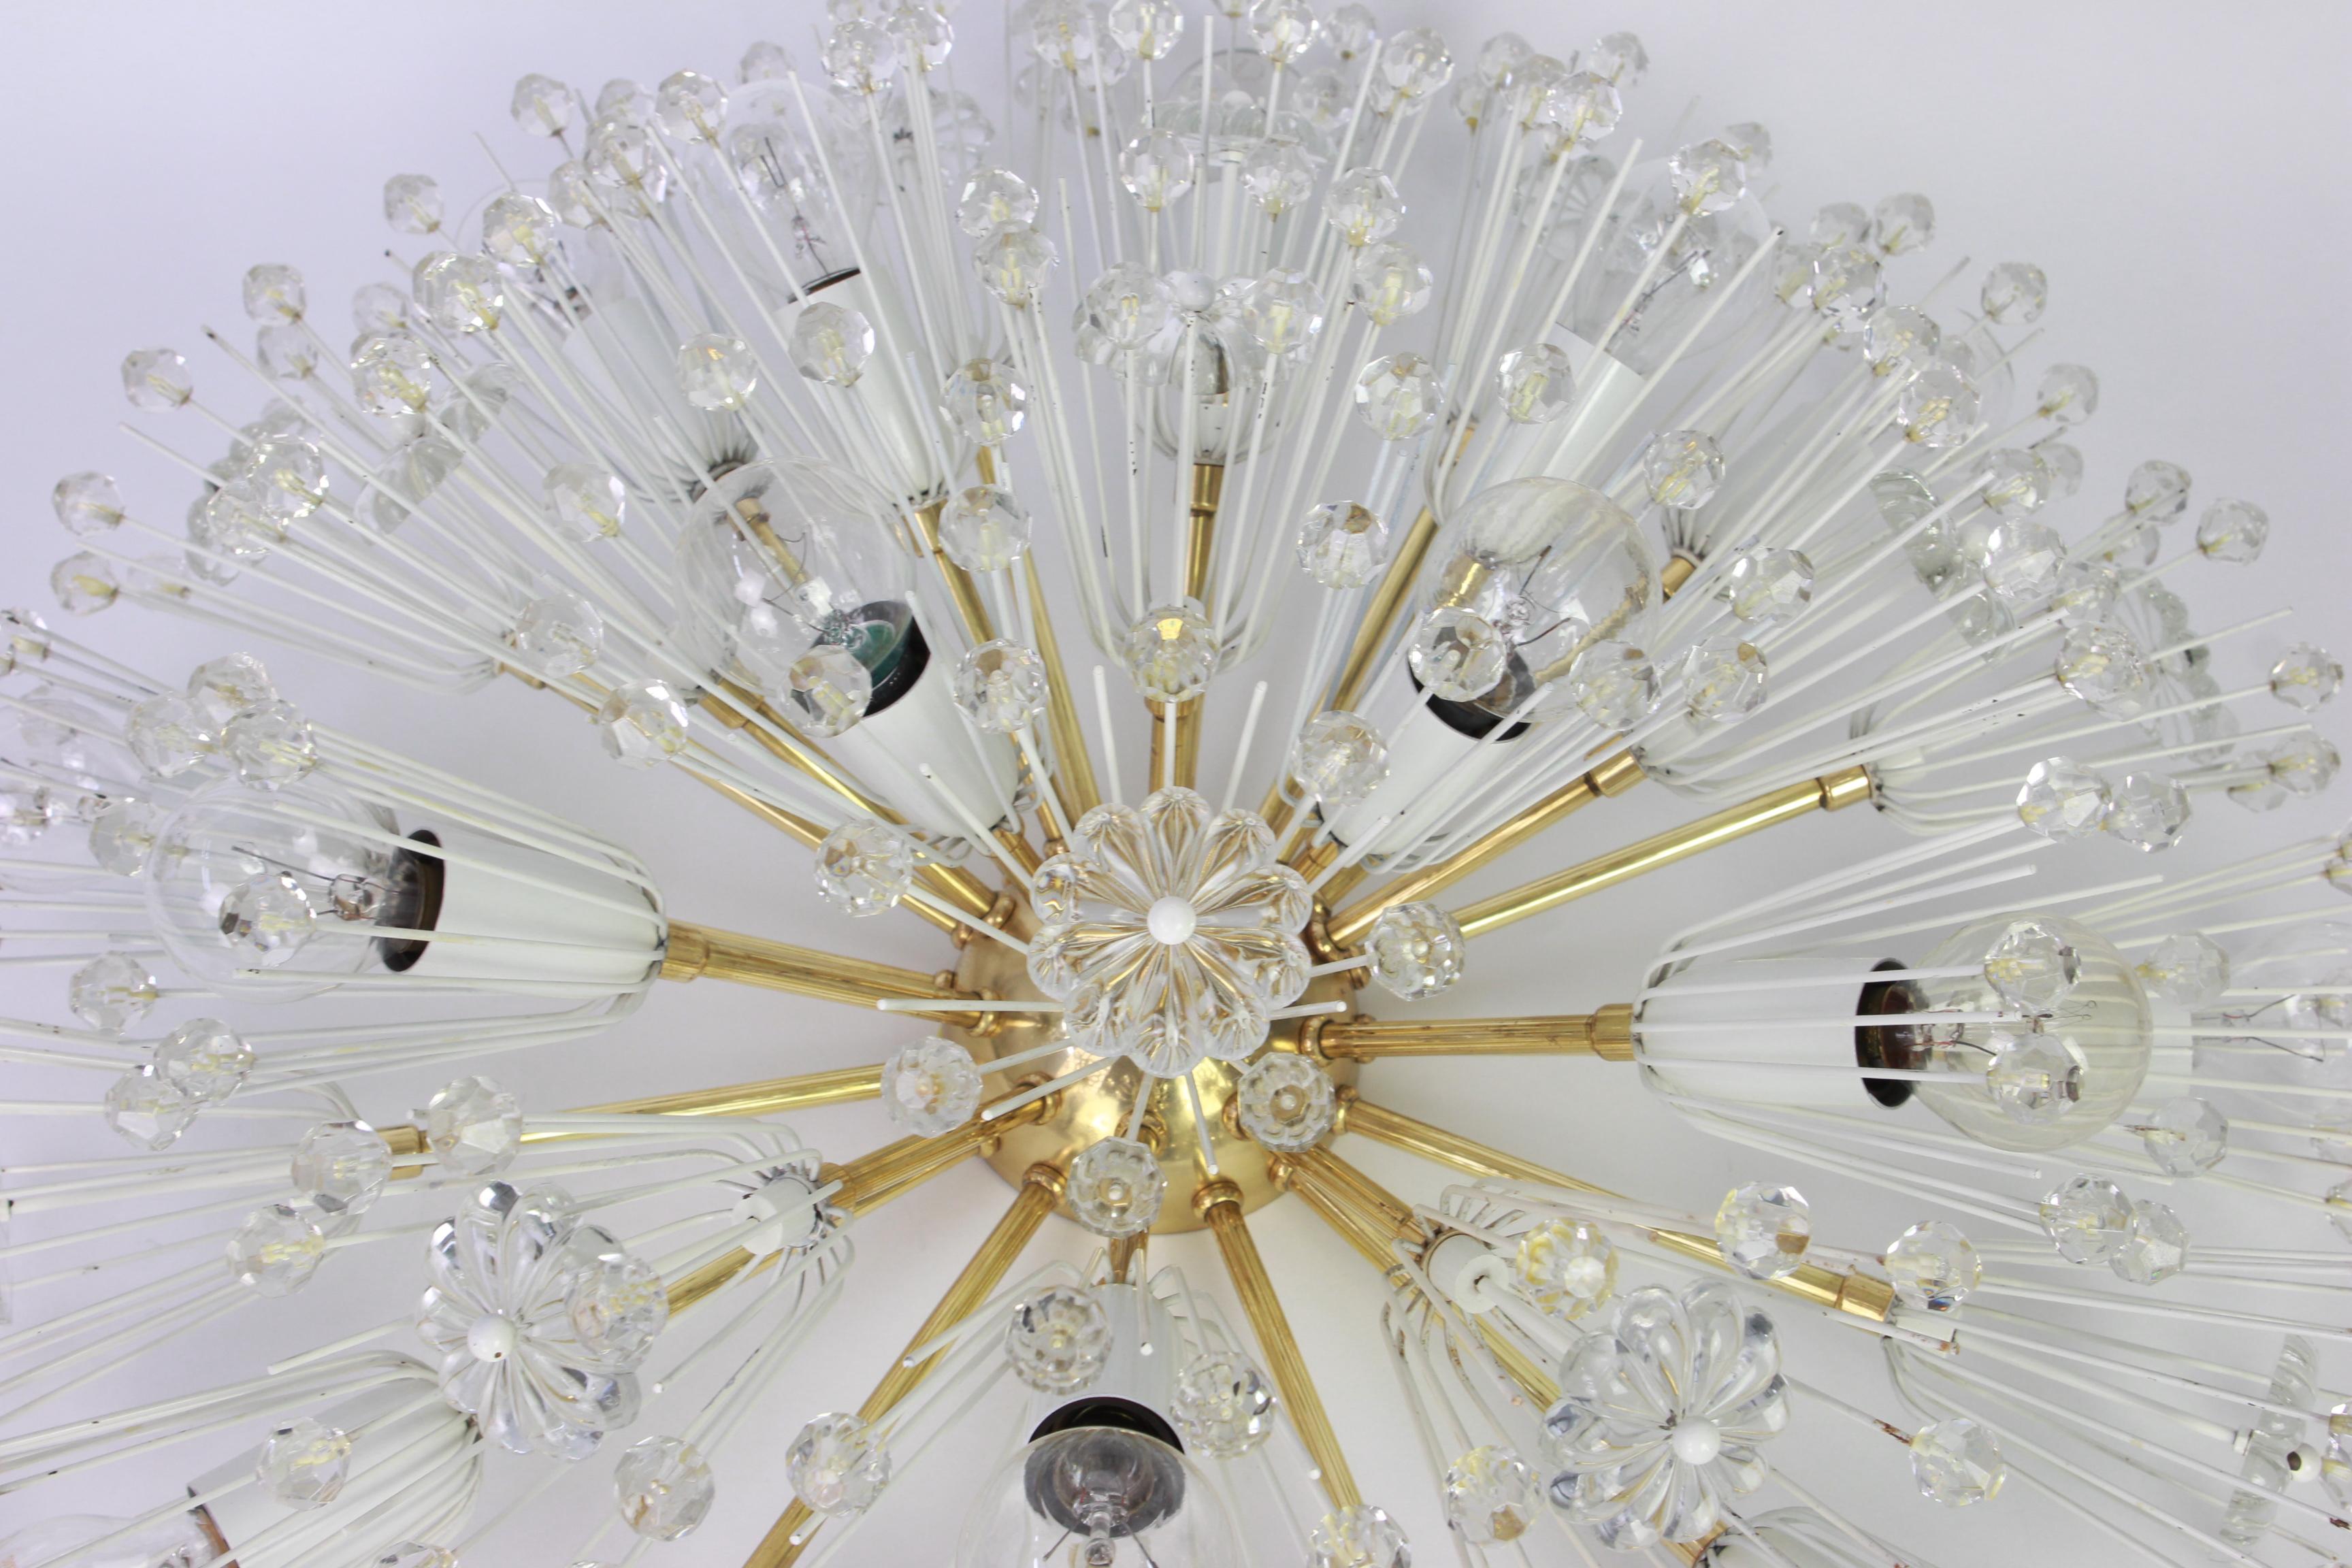 Beautiful large starburst brass flush mount with hundreds of crystals designed by Emil Stejnar for Nikoll, manufactured in Austria, circa 1960s.

Heavy quality and in good condition with small signs of age.
Cleaned, well-wired and ready to use.